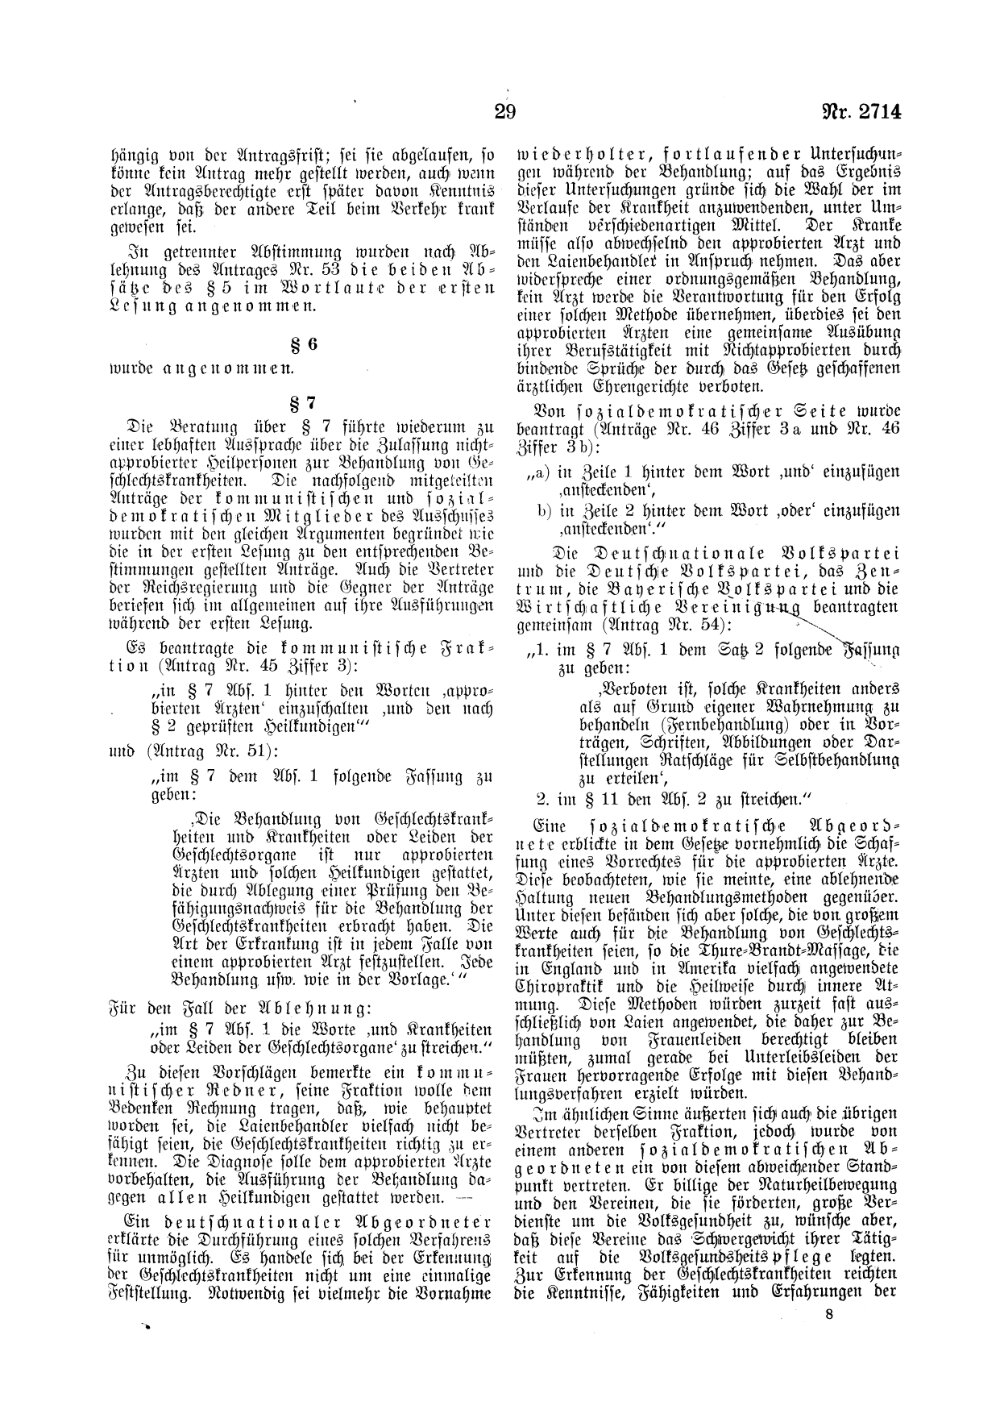 Scan of page 29